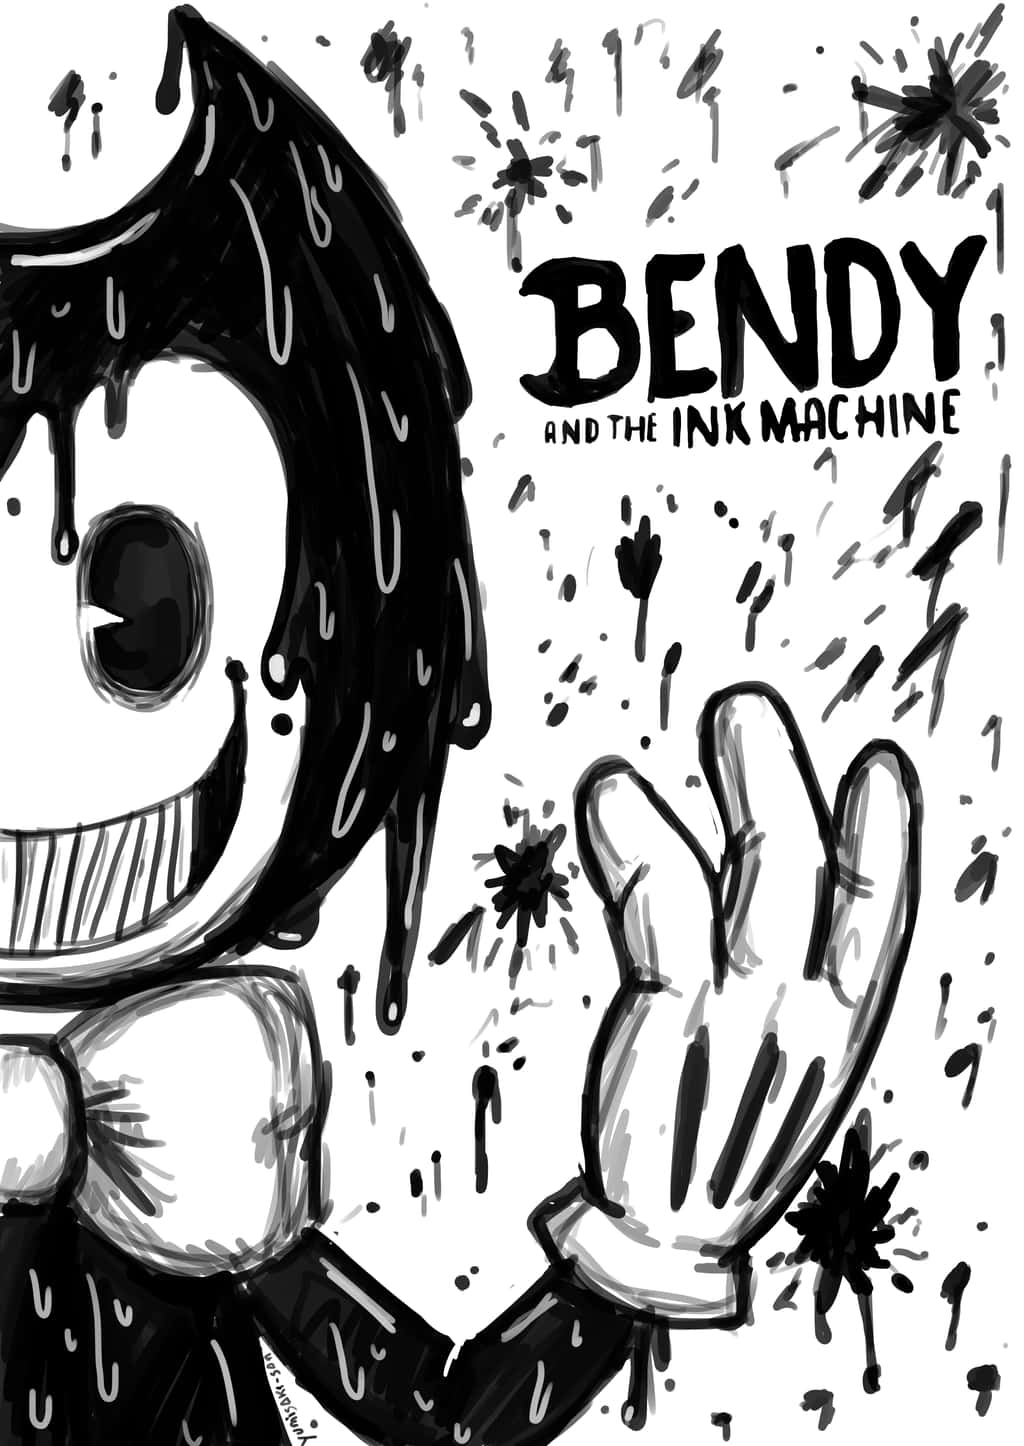 "Explore the dark secrets of Bendy and The Ink Machine!" Wallpaper